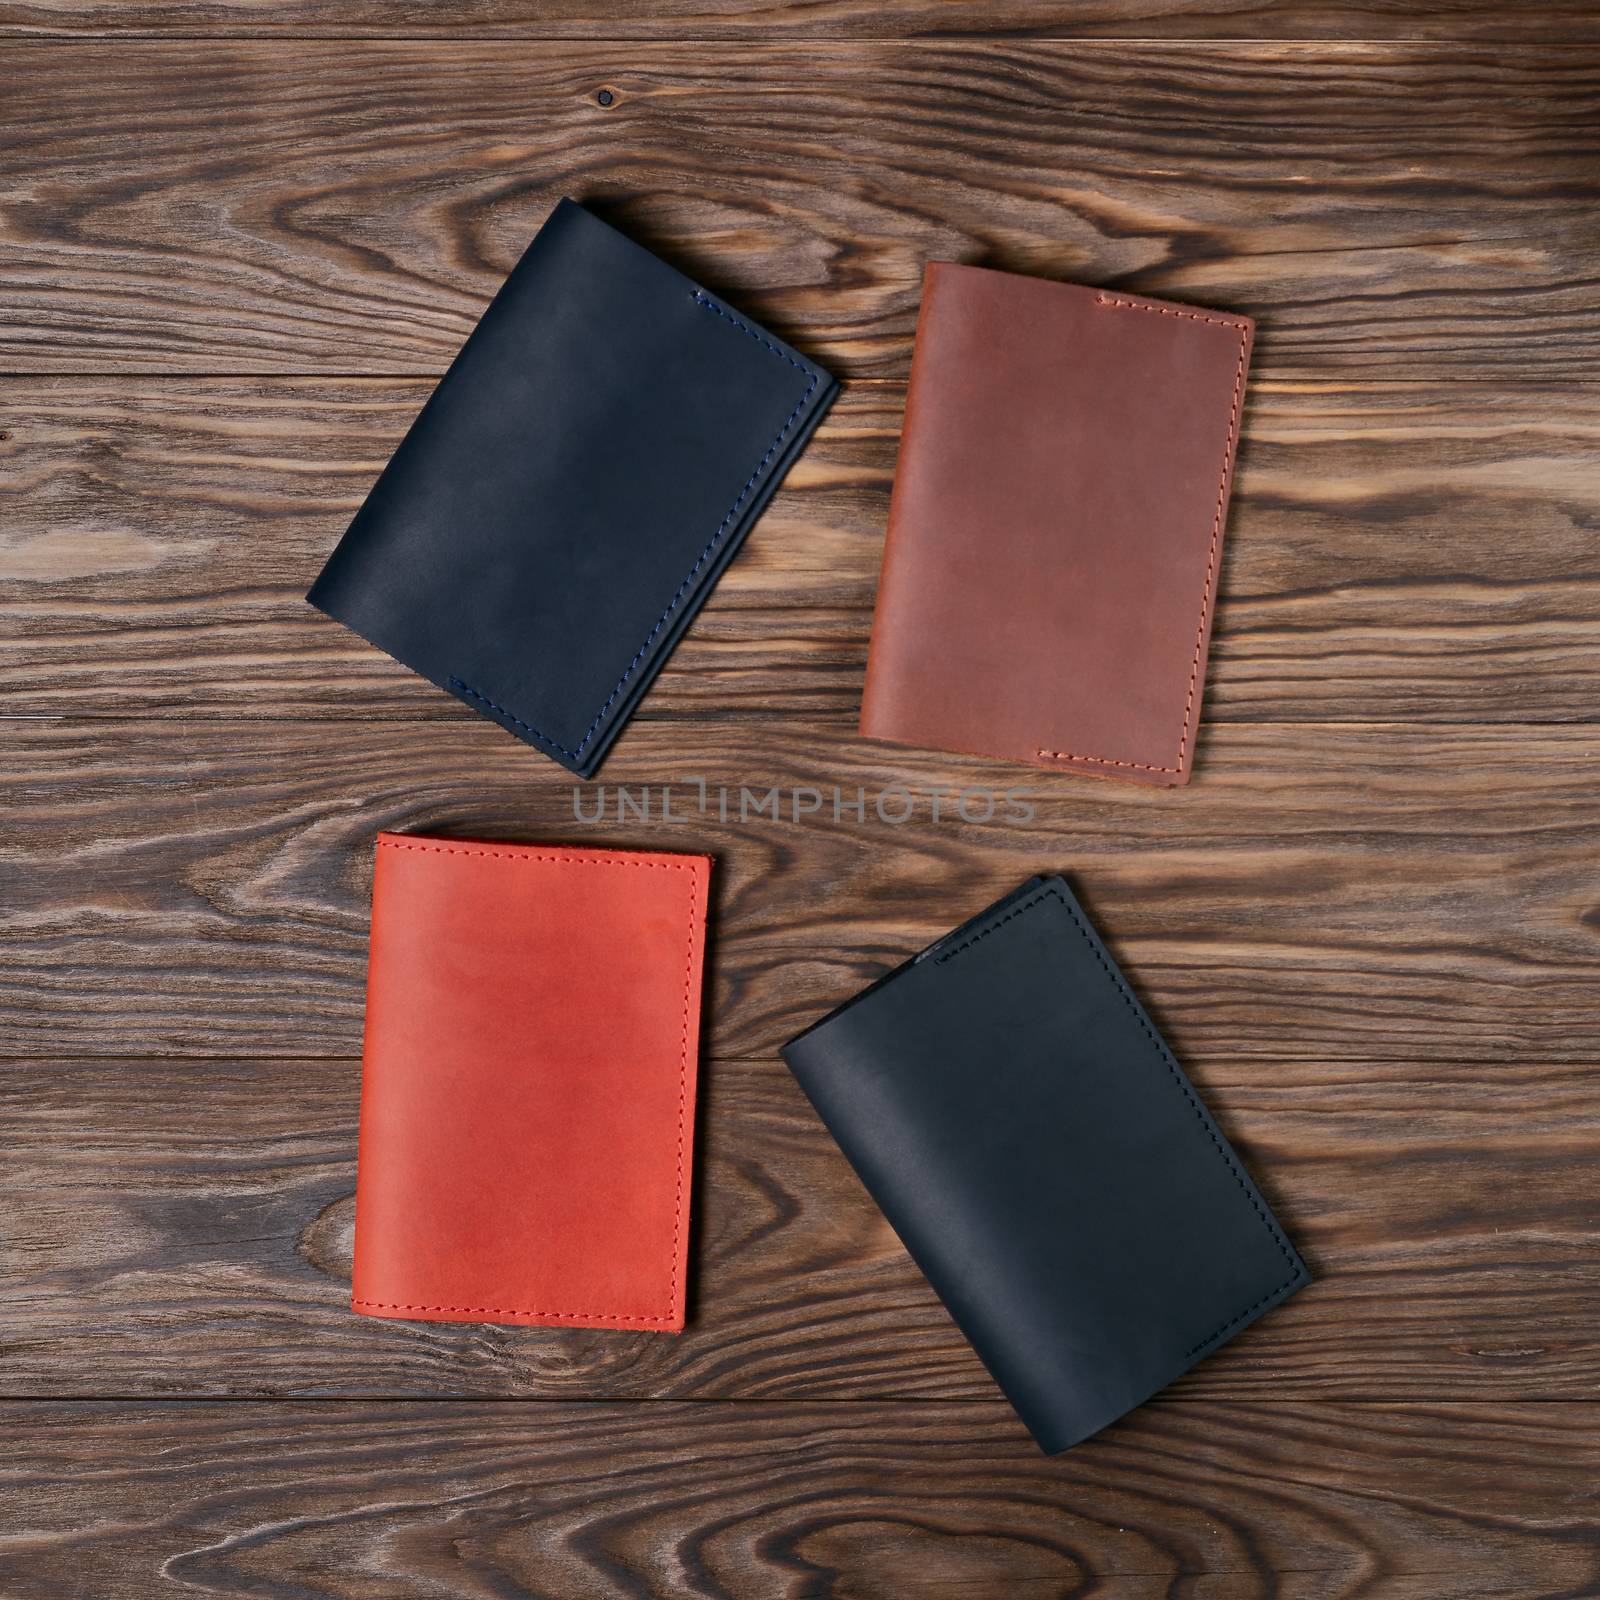 Four handmade leather passport covers on wooden textured background. Black, red, ginger and brown covers. Up to down view. Stock photo of luxury accessories.